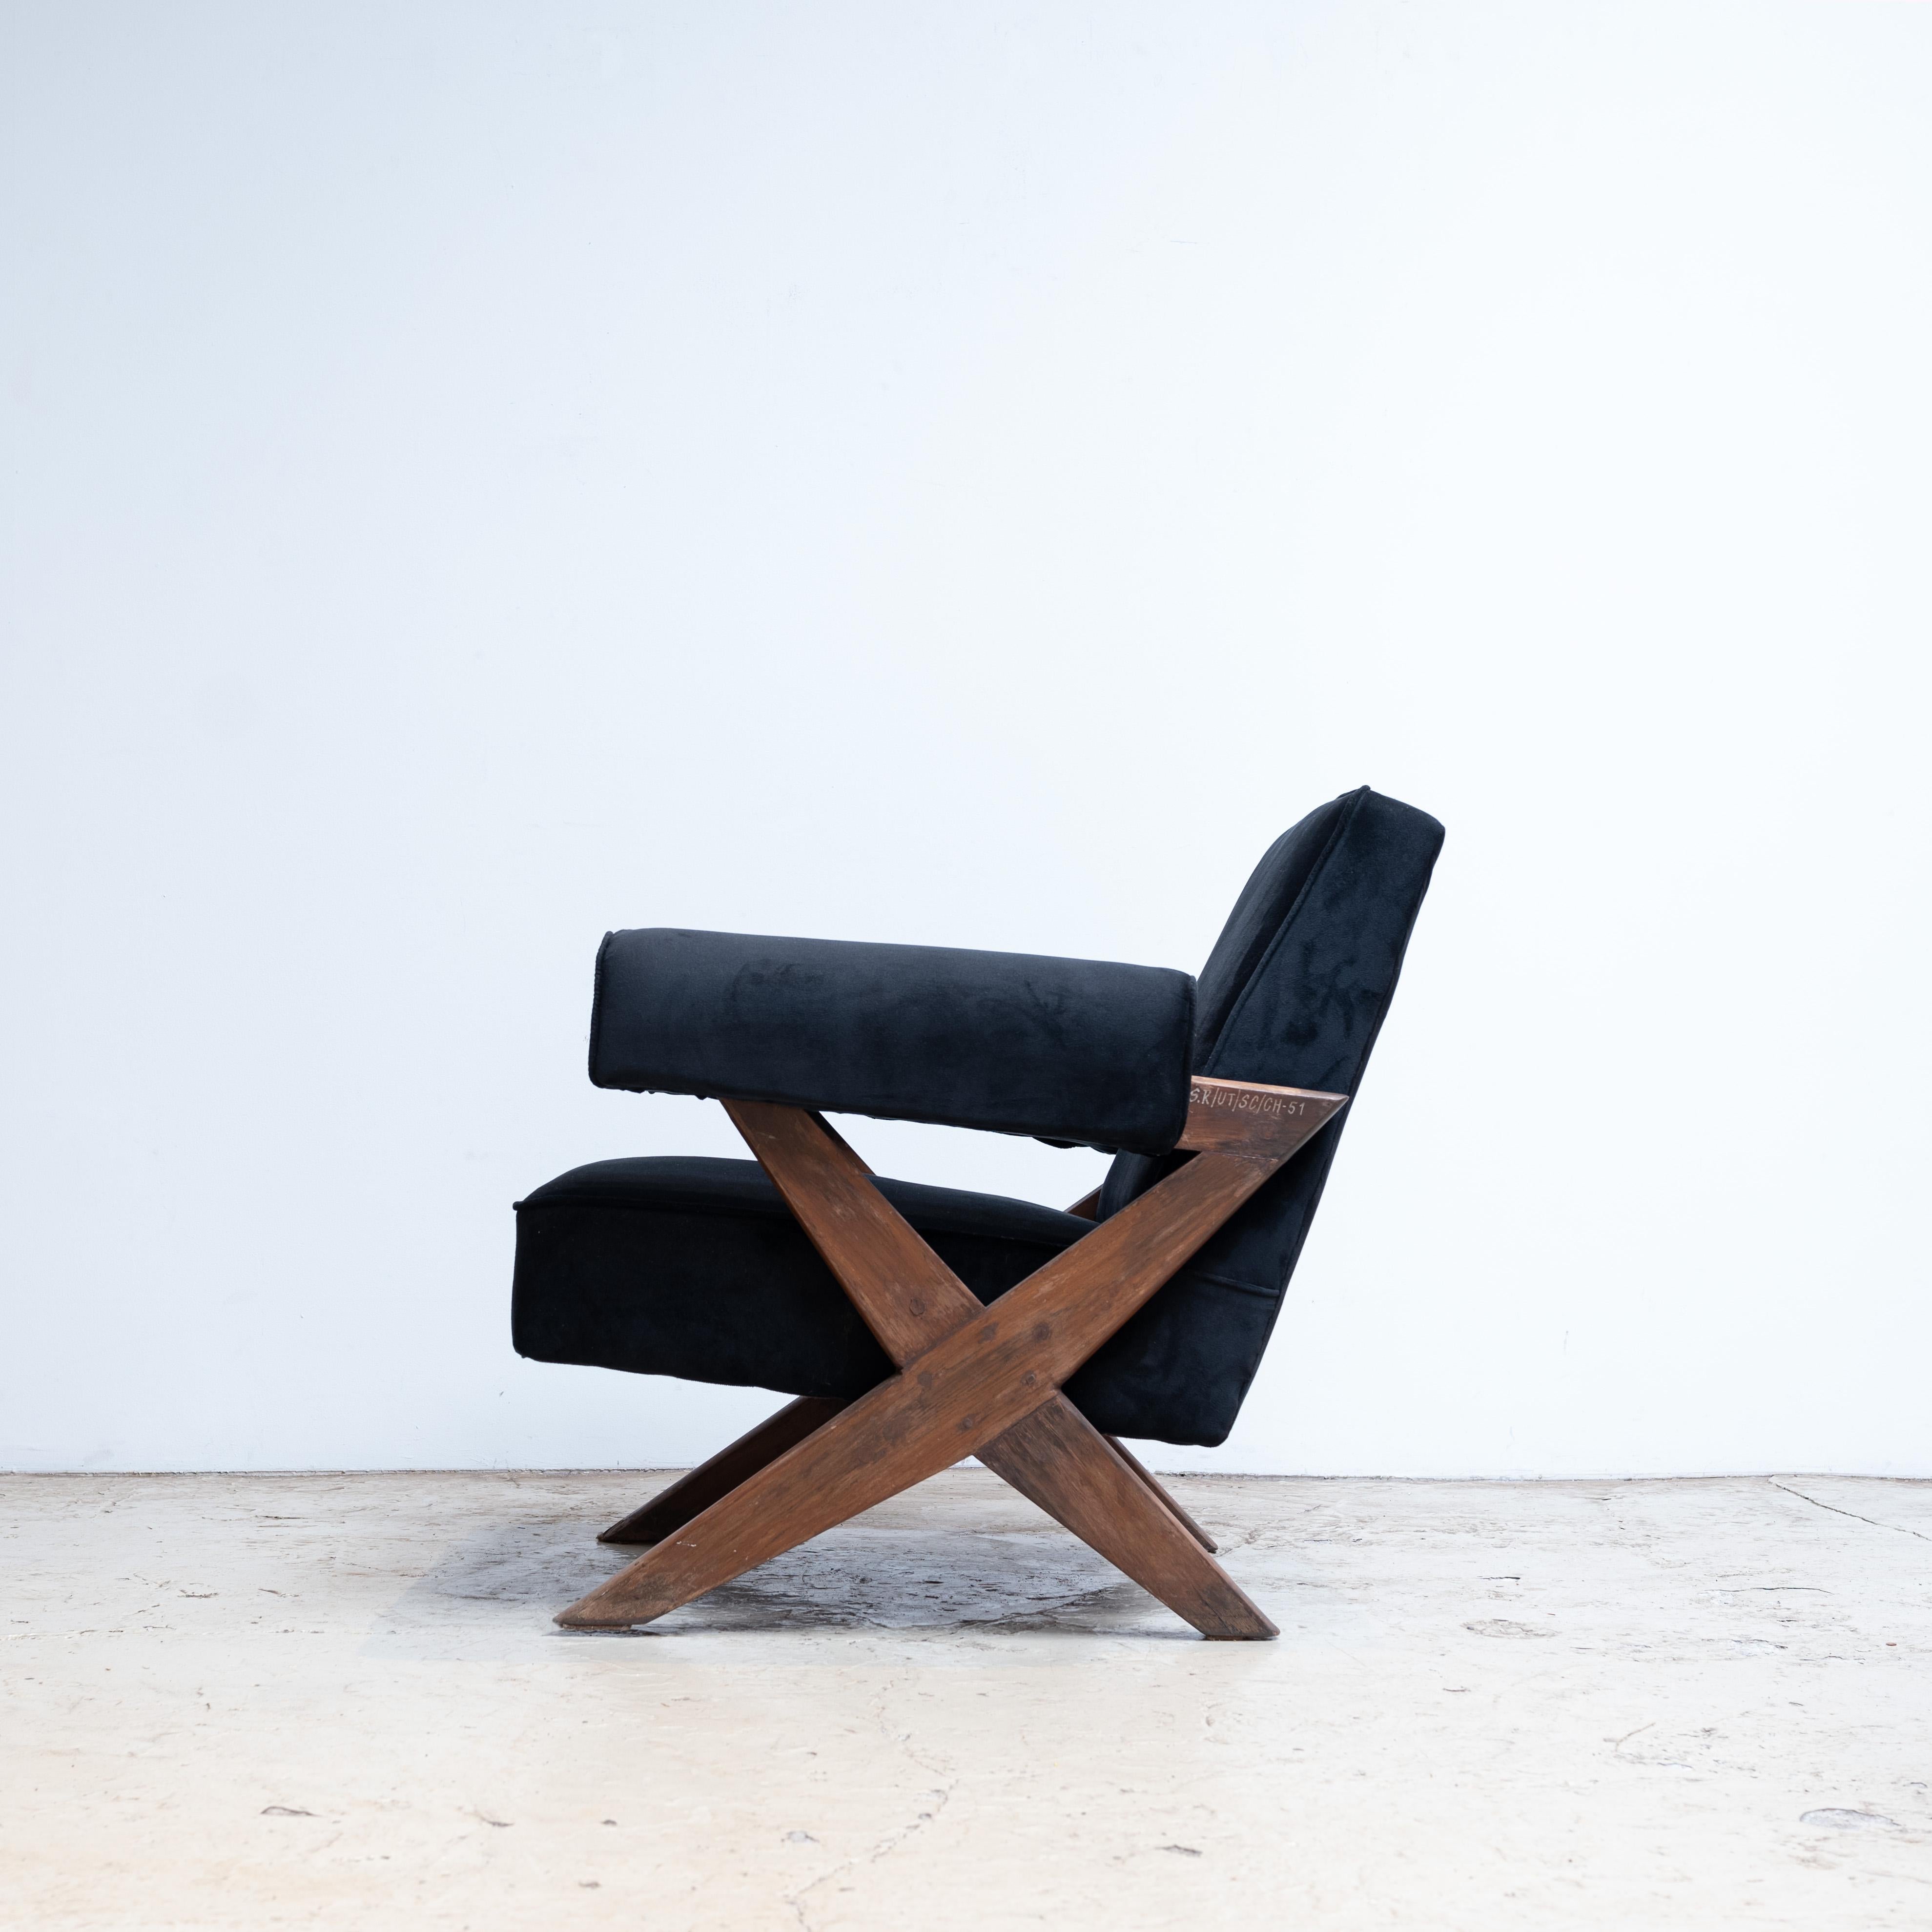 Teak Pierre Jeanneret X-Leg Upholstered Lounge Chair, Circa 1960, Chandigarh, India For Sale